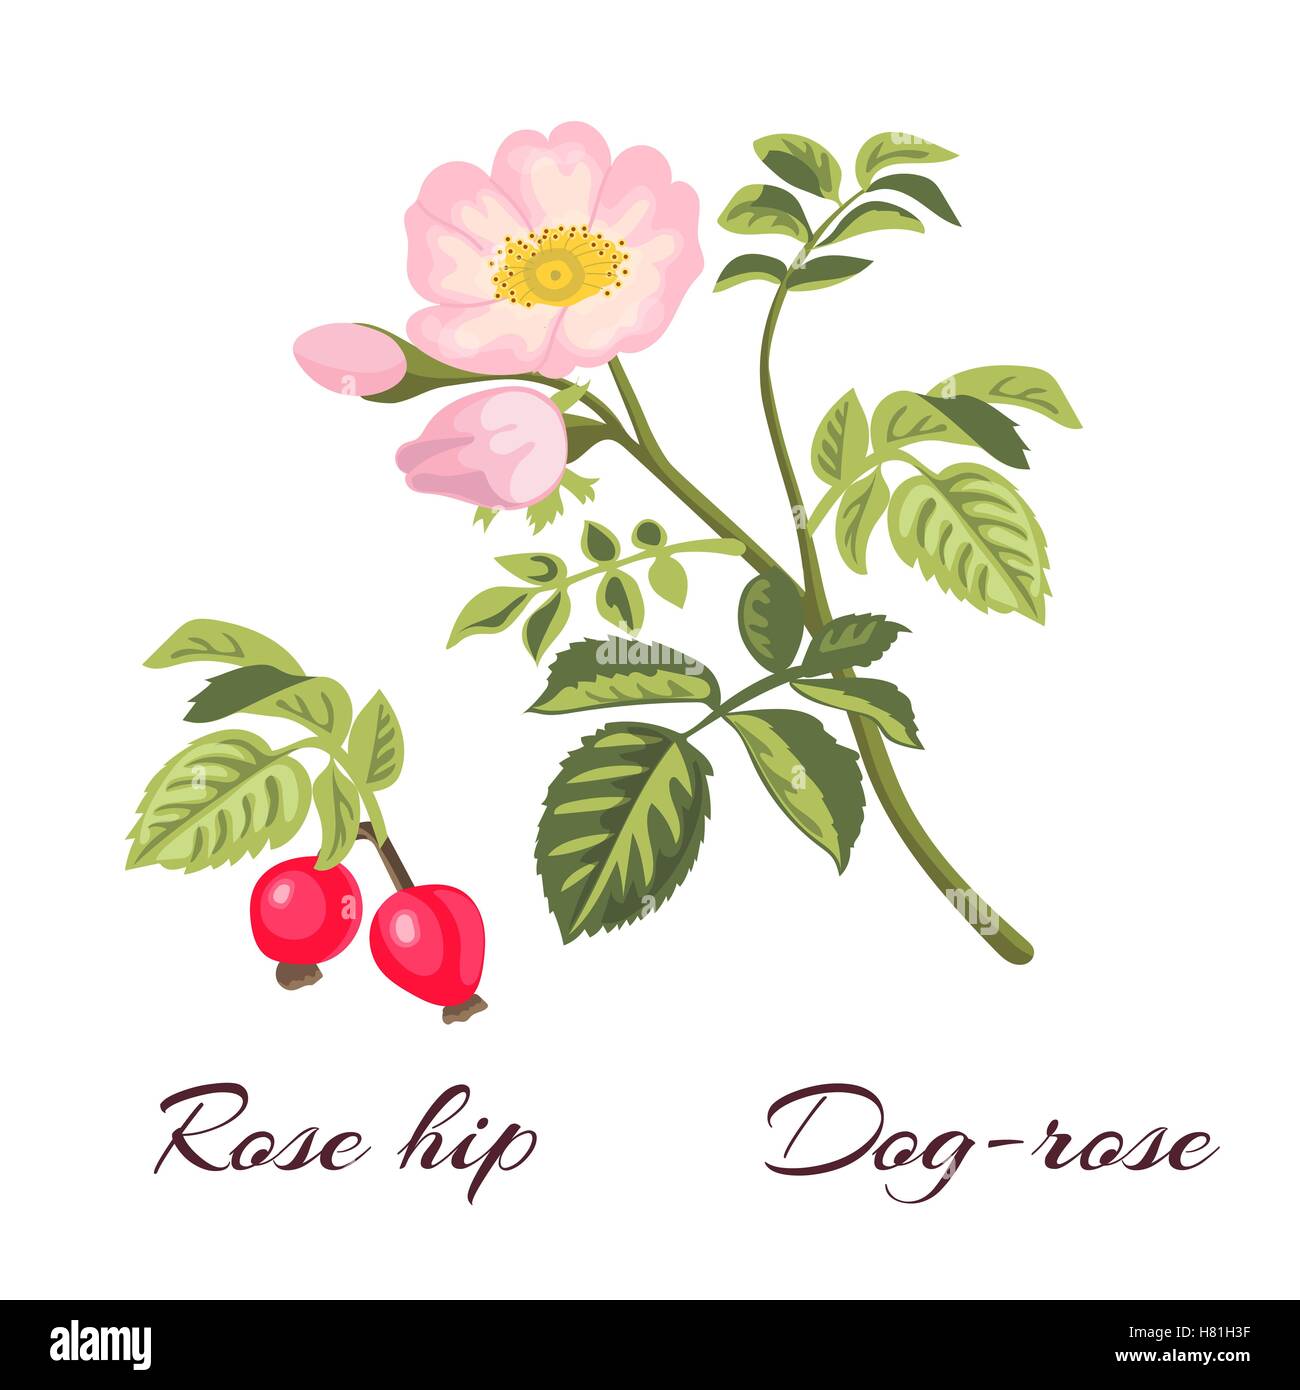 Dog-rose branch with leaves and flowers. Wild rose. Rosa canina. Rose hip also known as rose haw or rose hep.Vector illustration Stock Vector